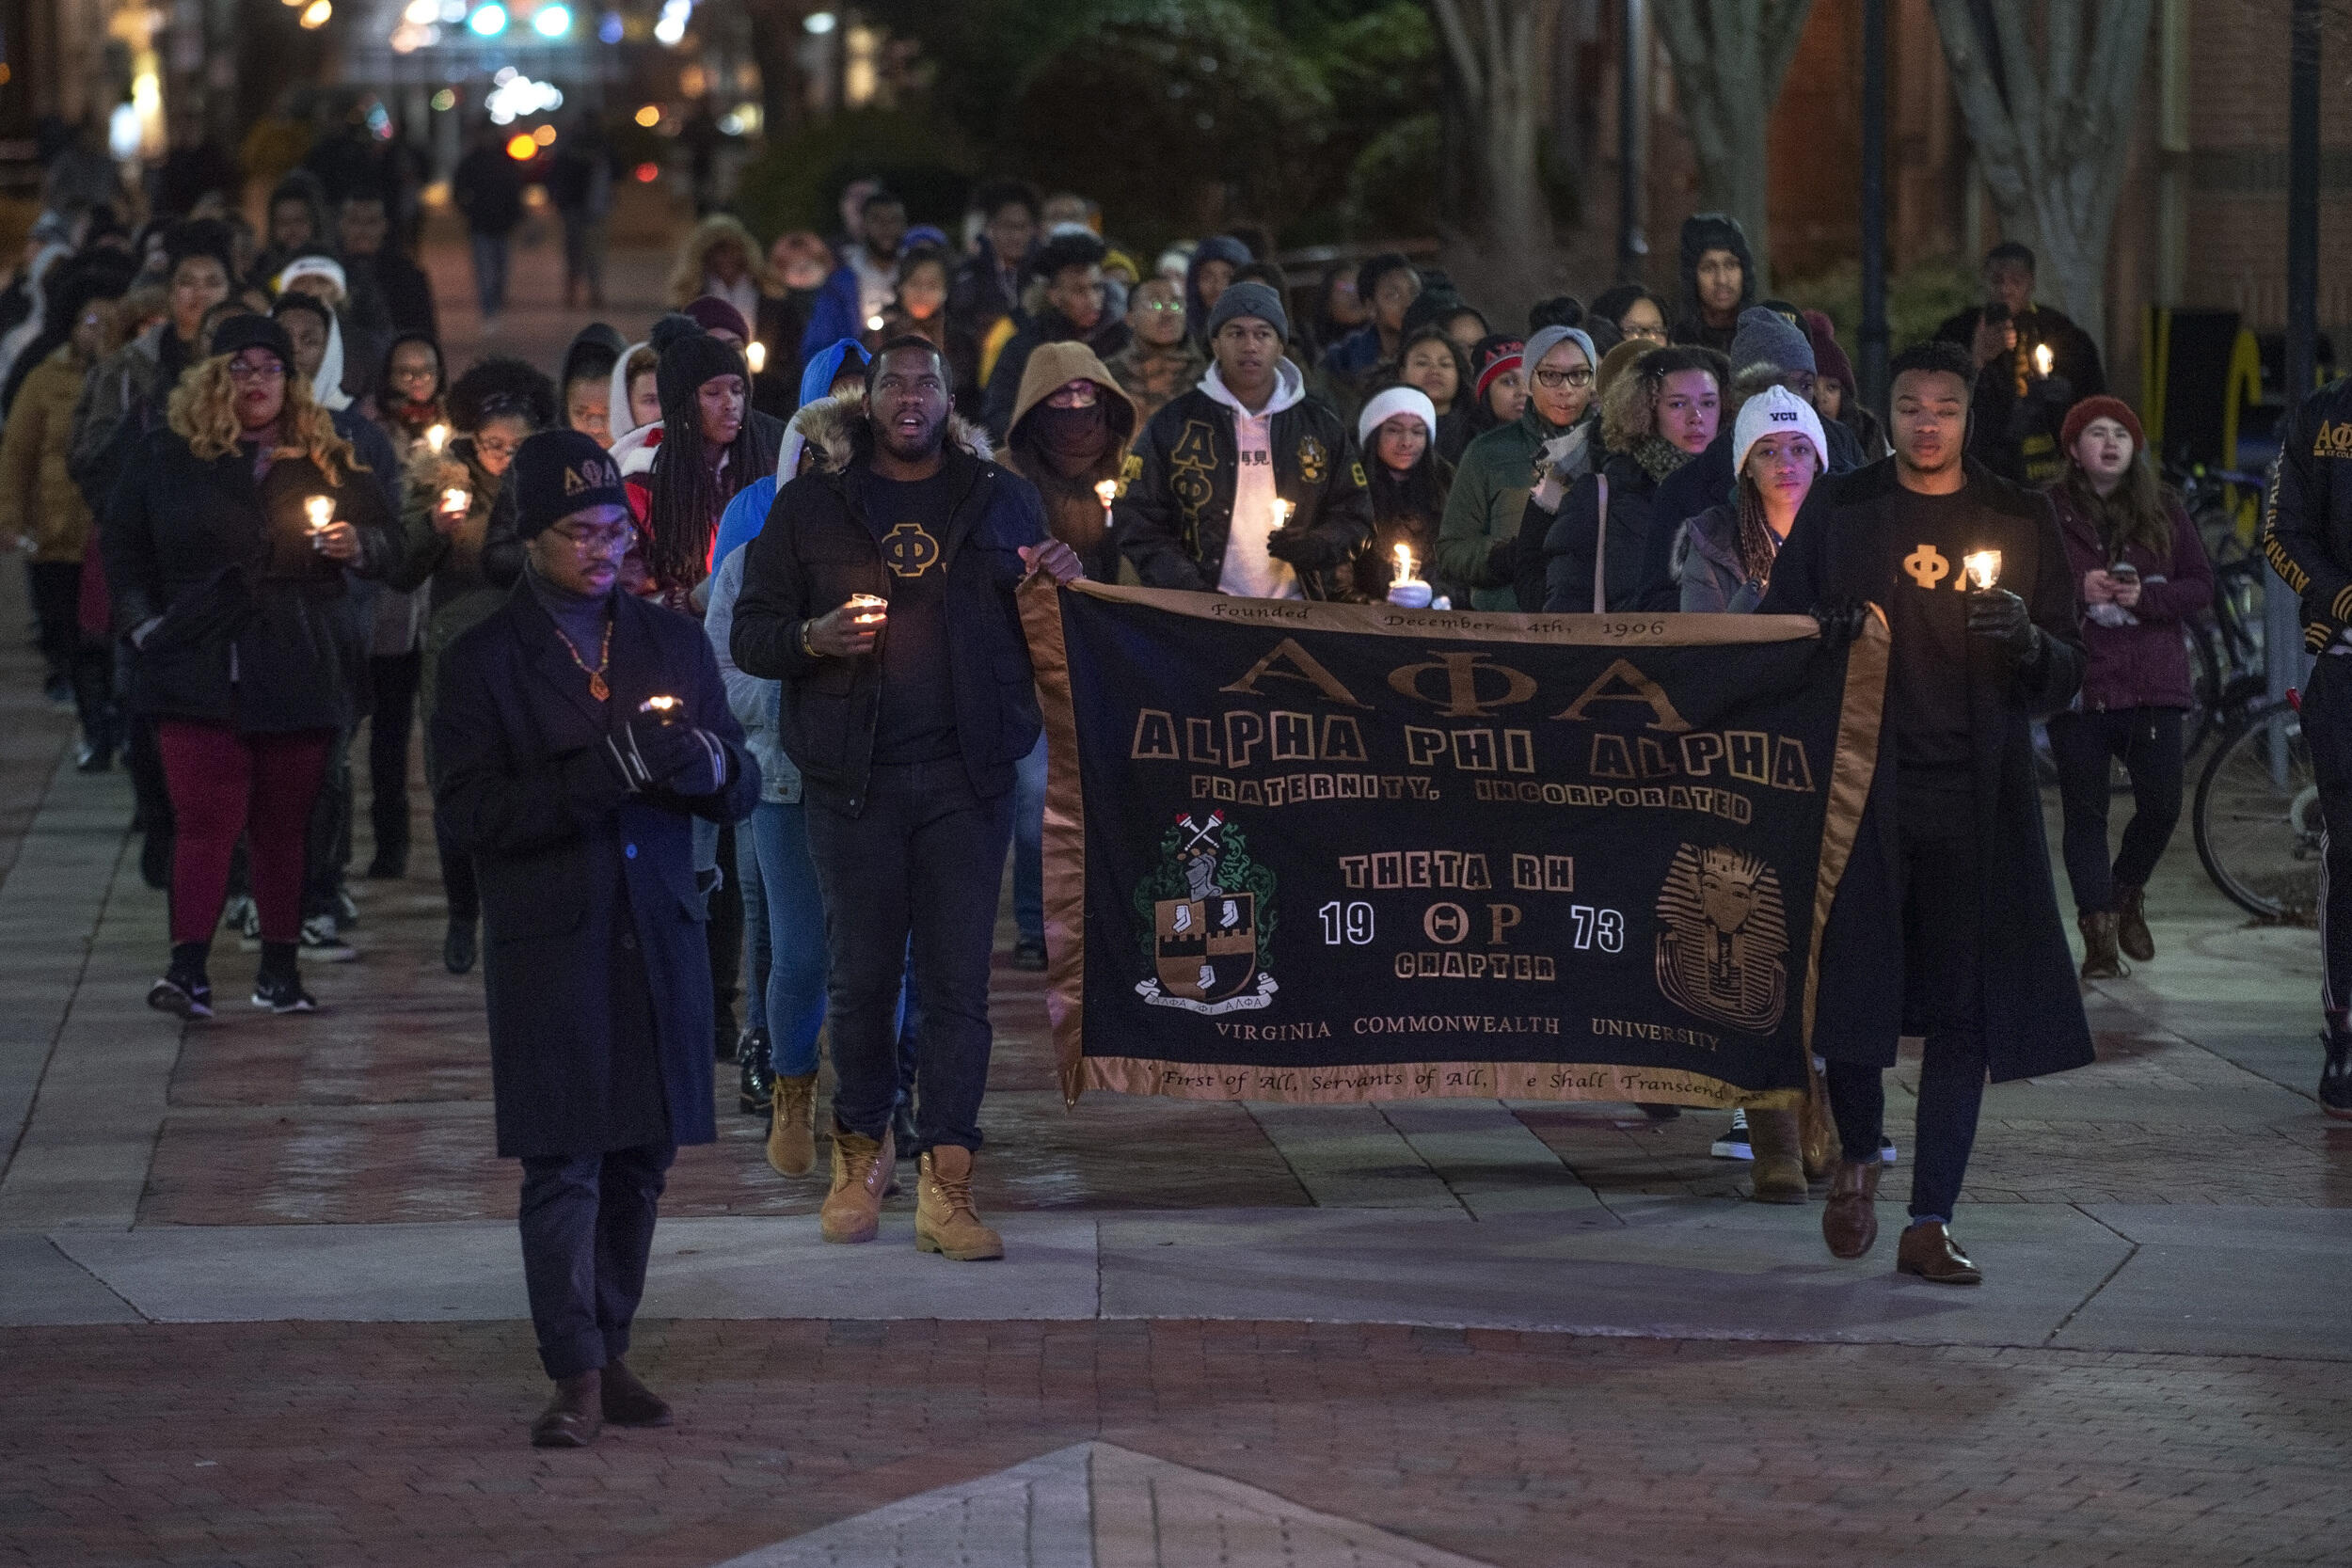 A photo of a group of people walking with candles. Two people in the front of the group hold up a banner for Alpha Phi Alpha. 